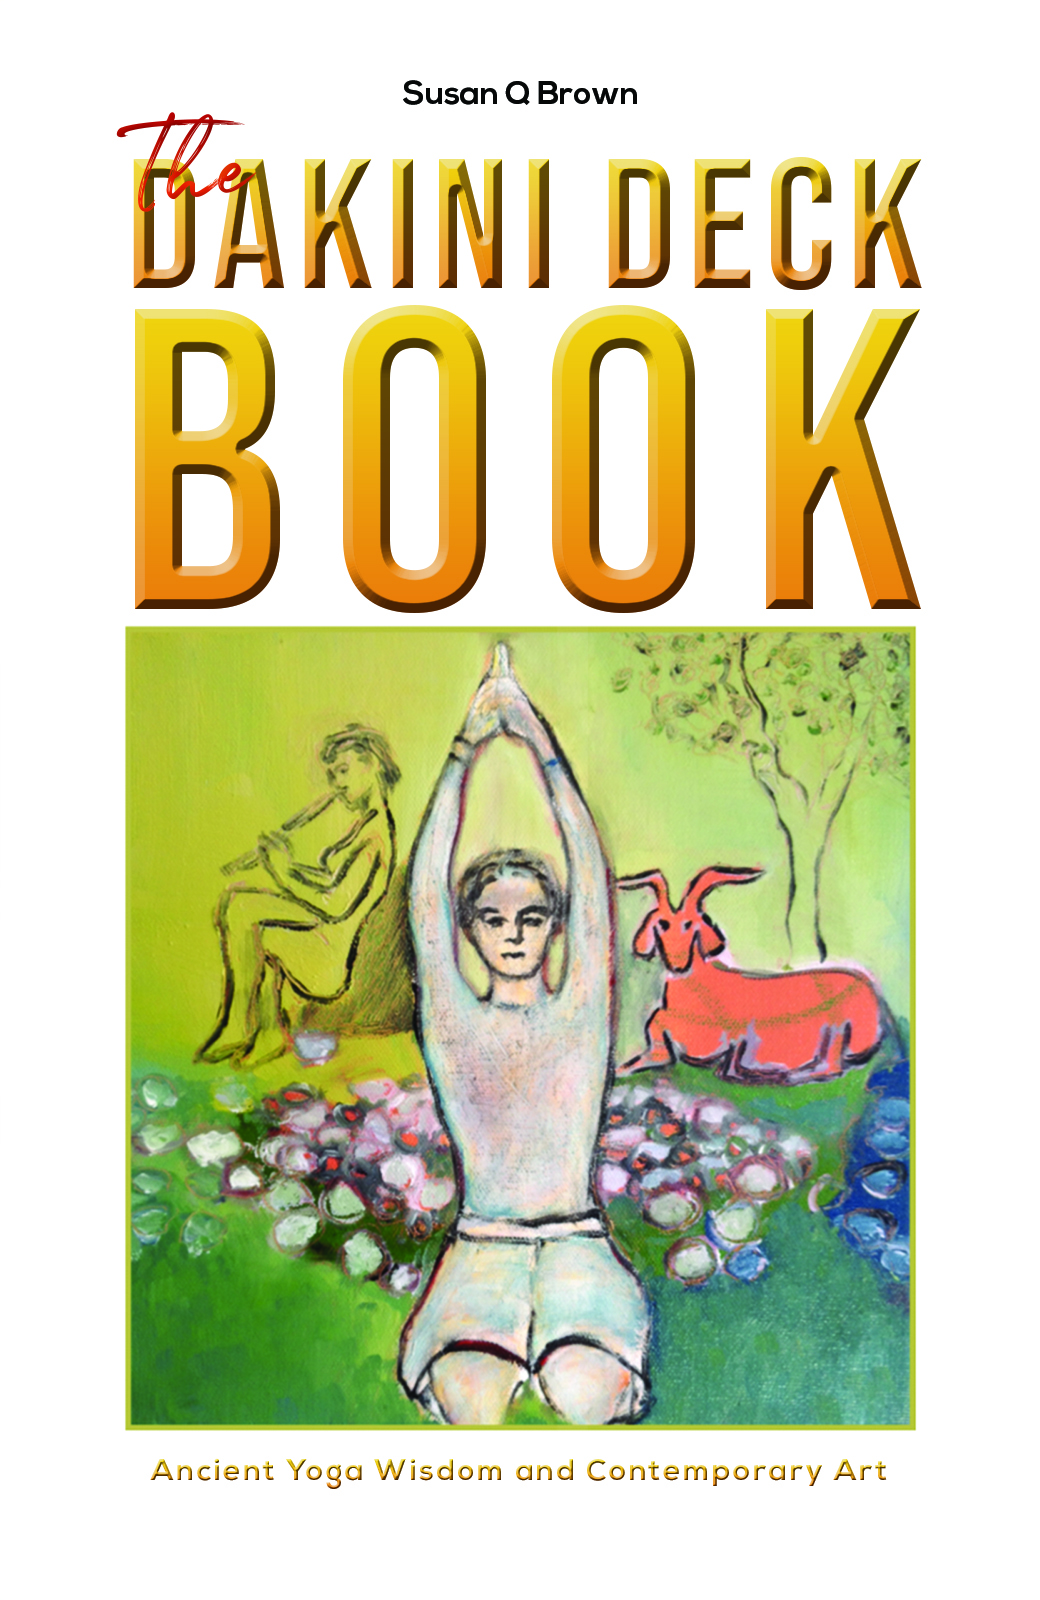 This image is the cover for the book The Dakini Deck Book